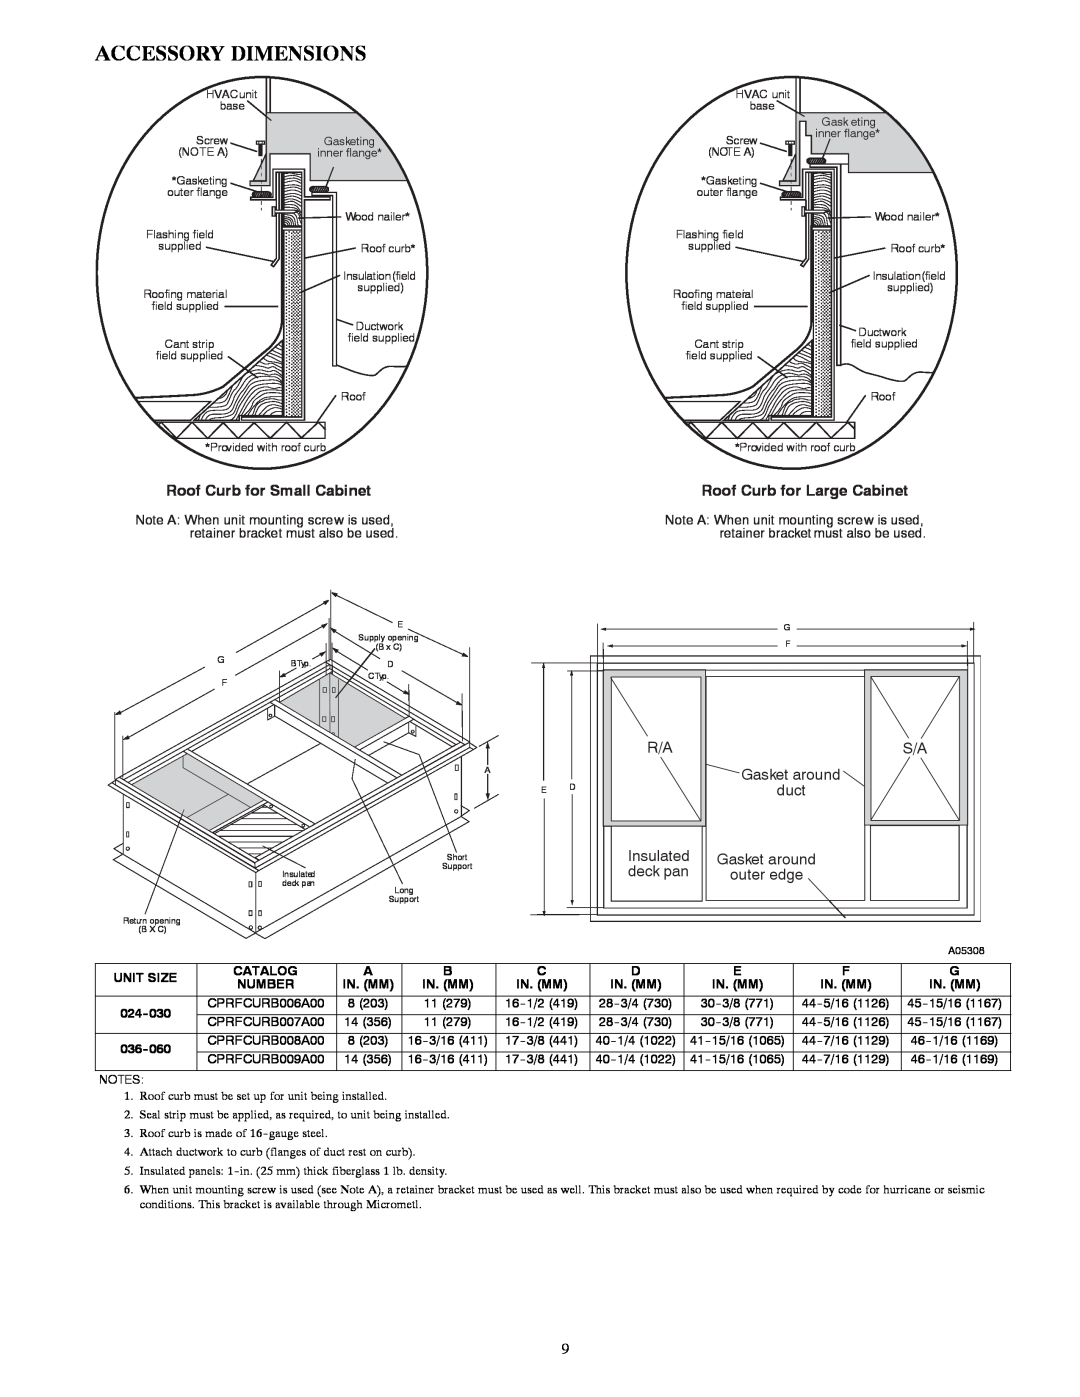 Carrier 50XT manual Accessory Dimensions, Roof Curb for Small Cabinet, Roof Curb for Large Cabinet, Gasket around, duct 